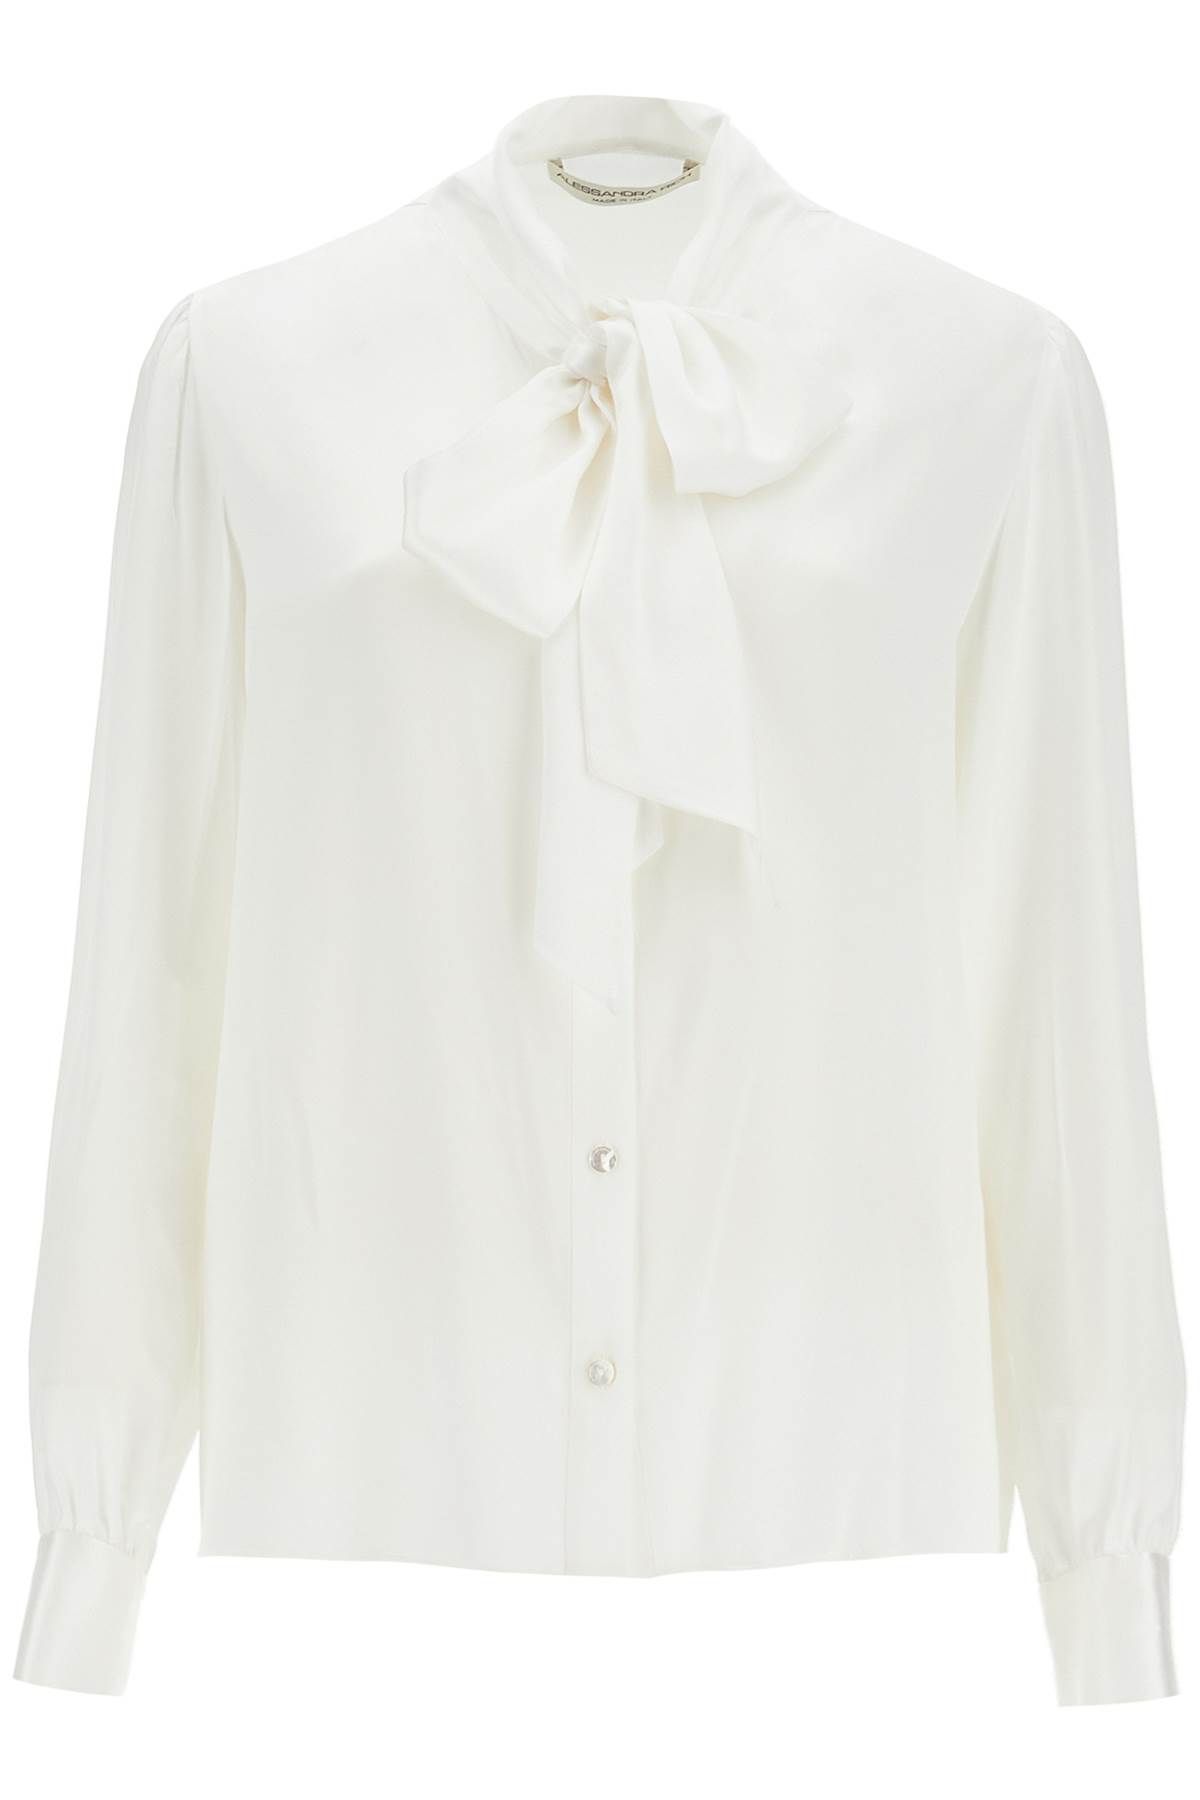 Alessandra Rich Blouse With Lavallière In White